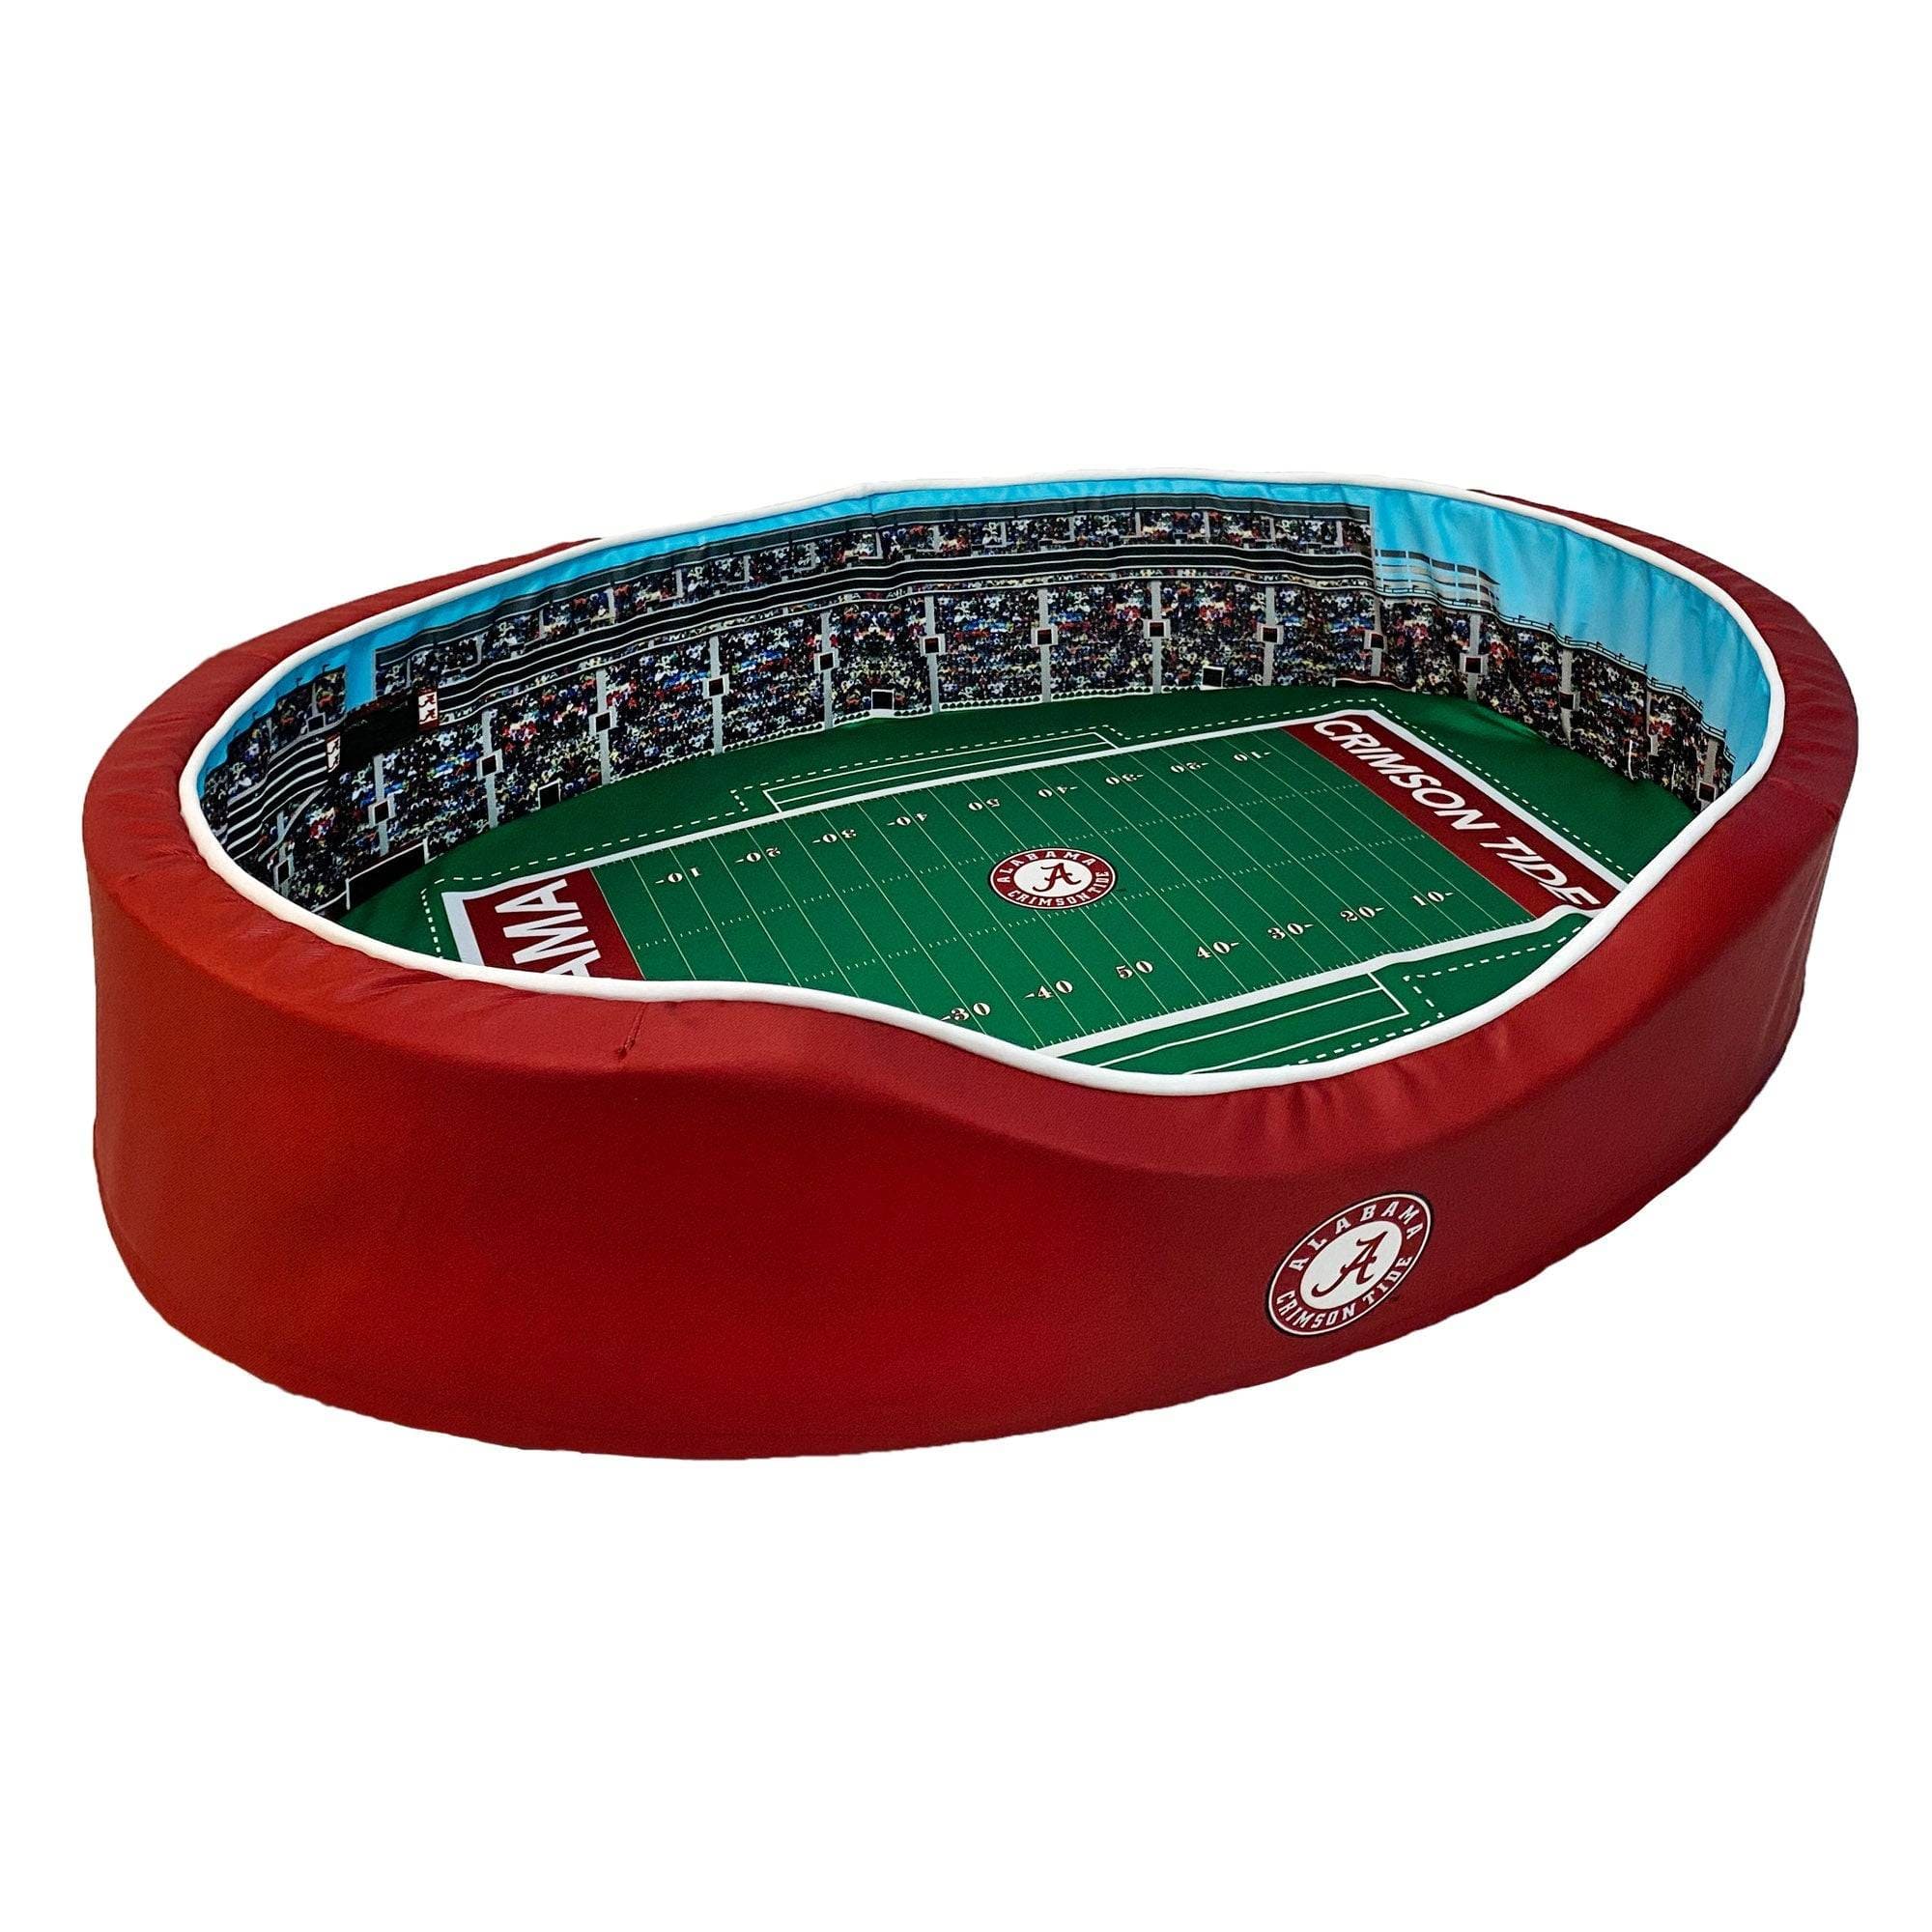  StadiumSpot Louisville Football Stadium Dog Bed - Authentic  Cardinals Graphics, Patented Design - Made from Durable, Eco-Friendly  Materials - Small, Medium, and Large Bed Sizes (Large) : Pet Supplies